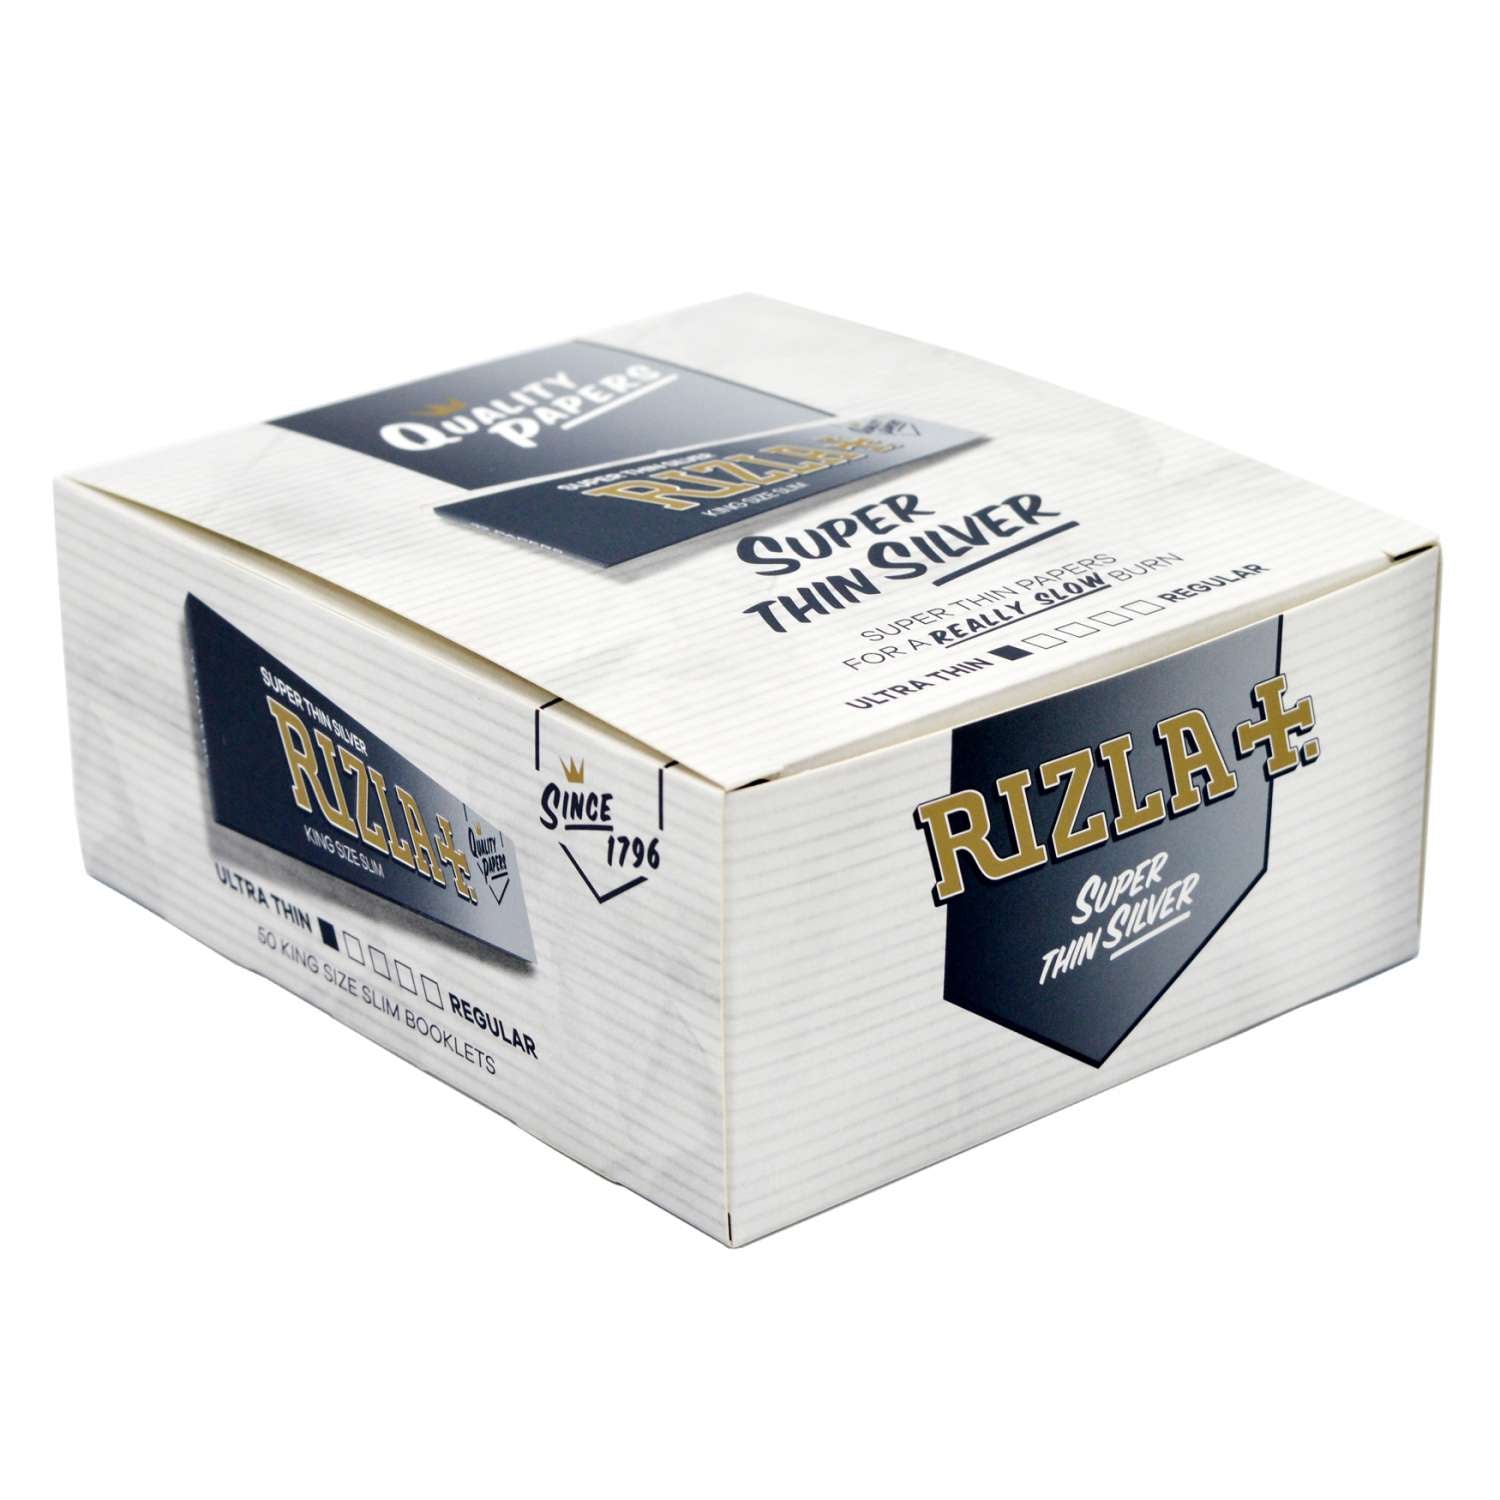 Rizla + Super Thin Silver Rolling Papers King Size (50 Pcs)